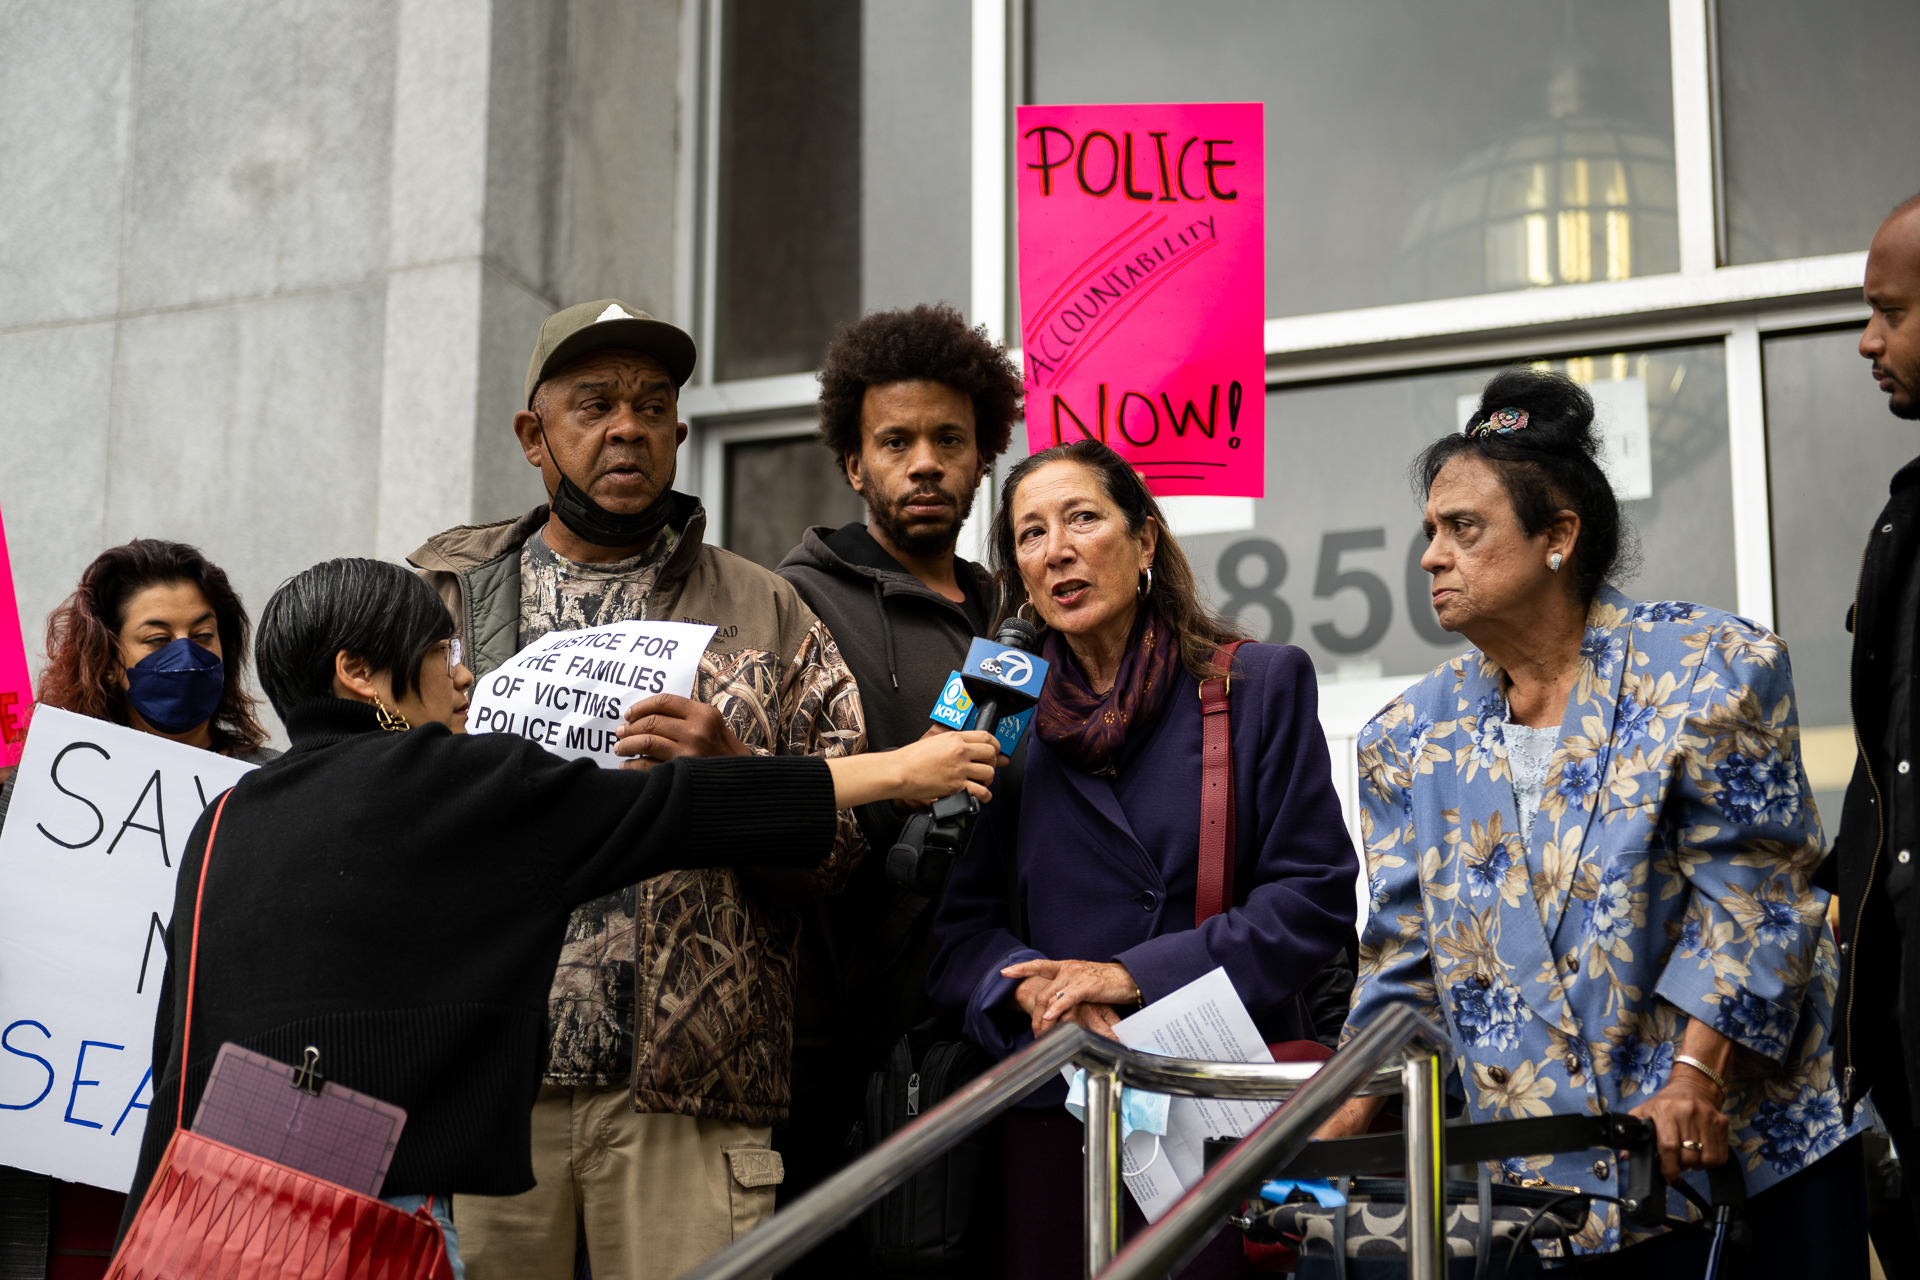 People gather on the steps of the Hall of Justice in San Francisco. A news reporter holds out an ABC7 microphone toward a woman with shoulder-length, brown hair and a navy coat on. Many people surround her. Some people hold signs that read, "Police accountability now!"